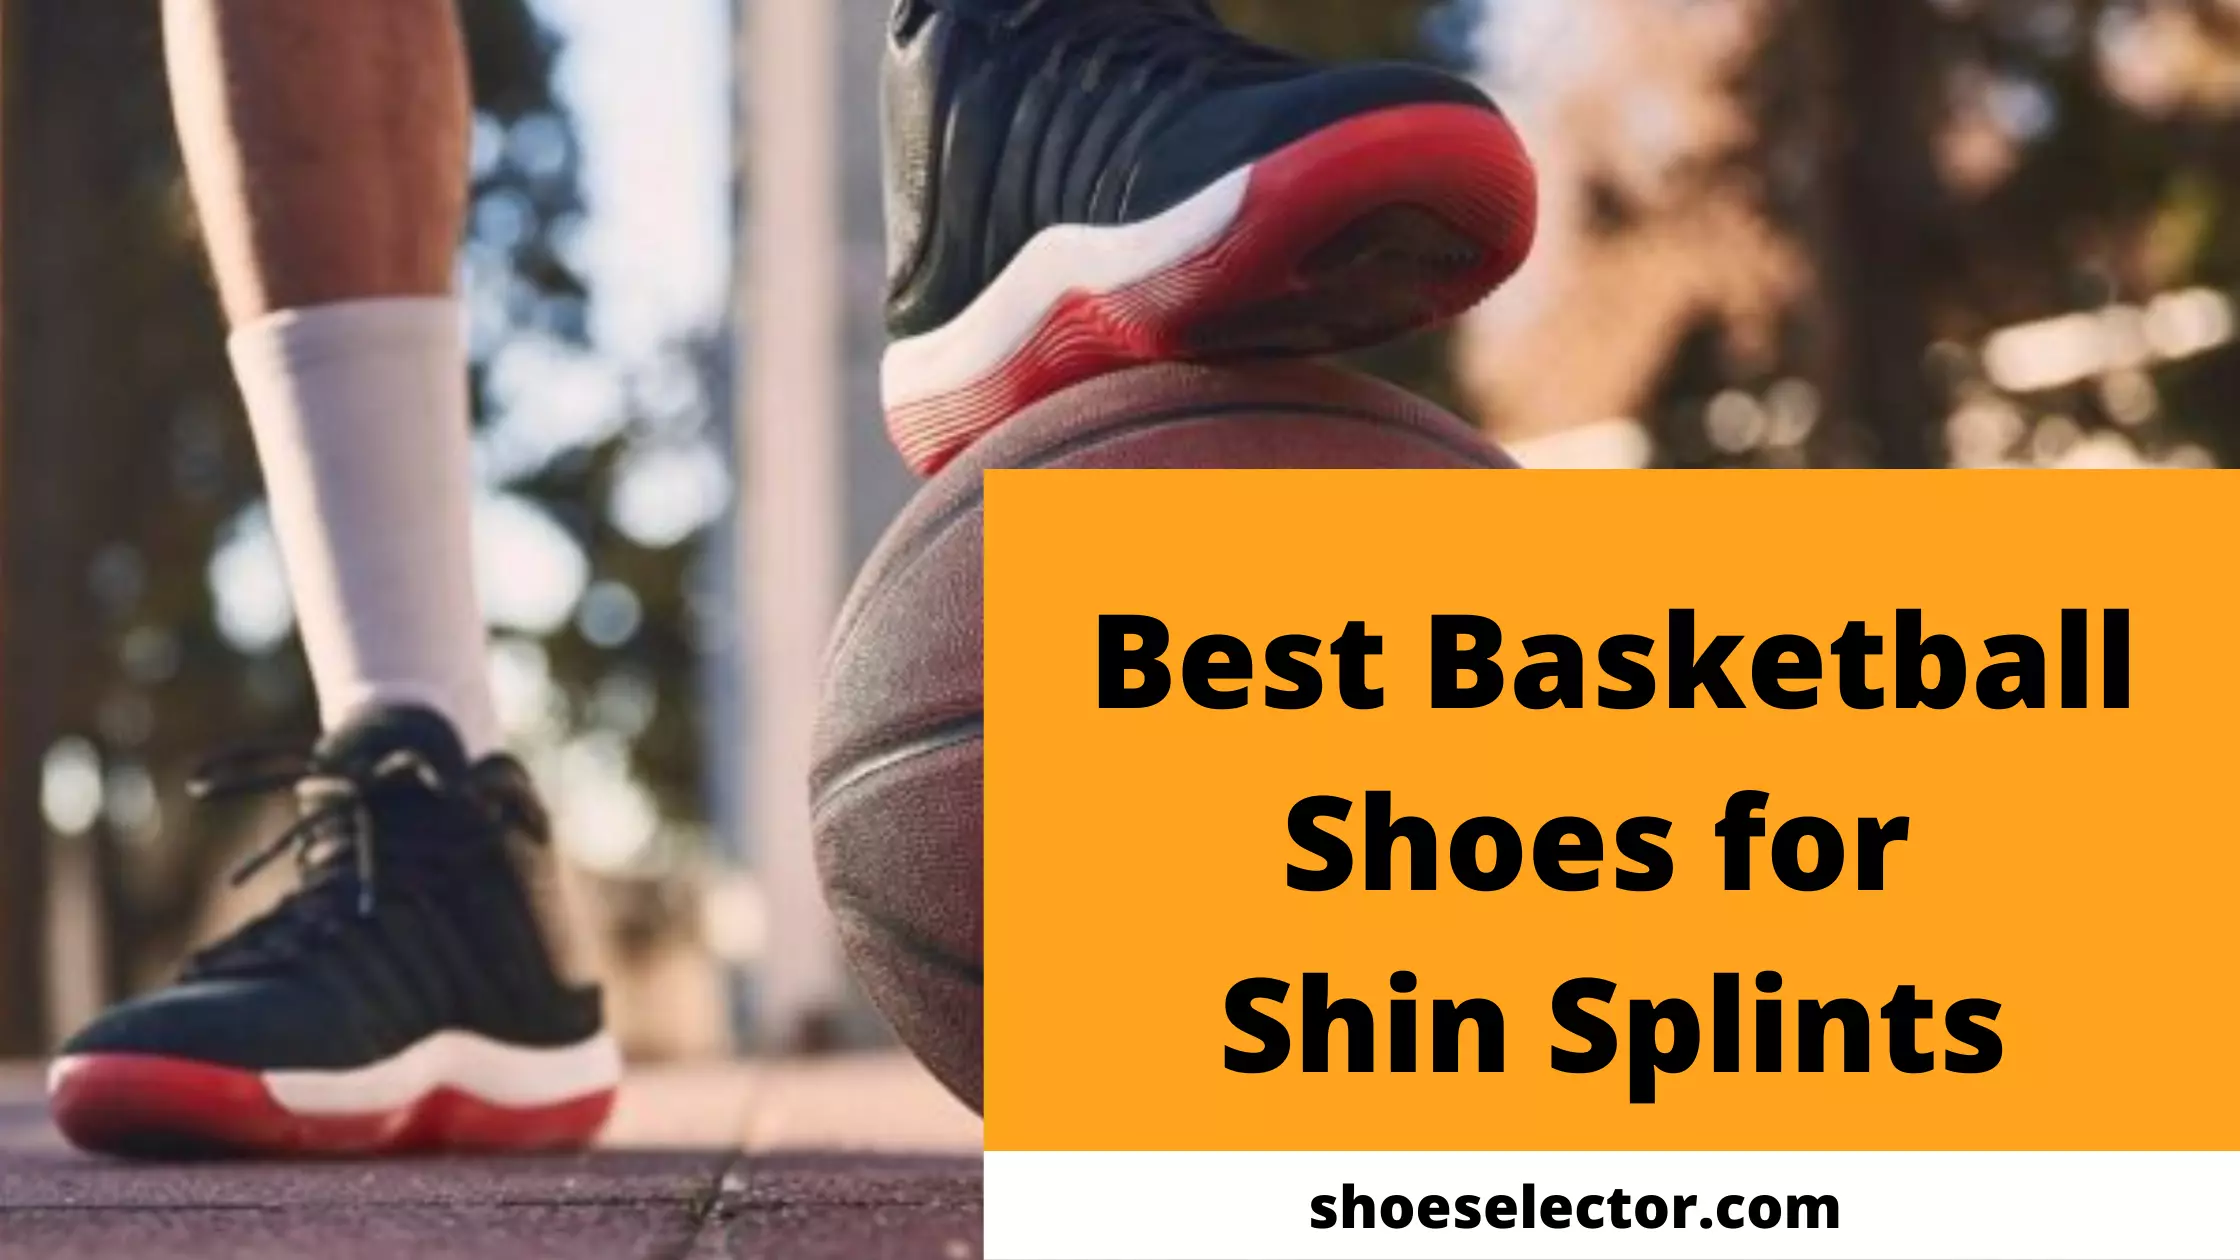 Best Basketball Shoes for Shin Splints - Complete Guide